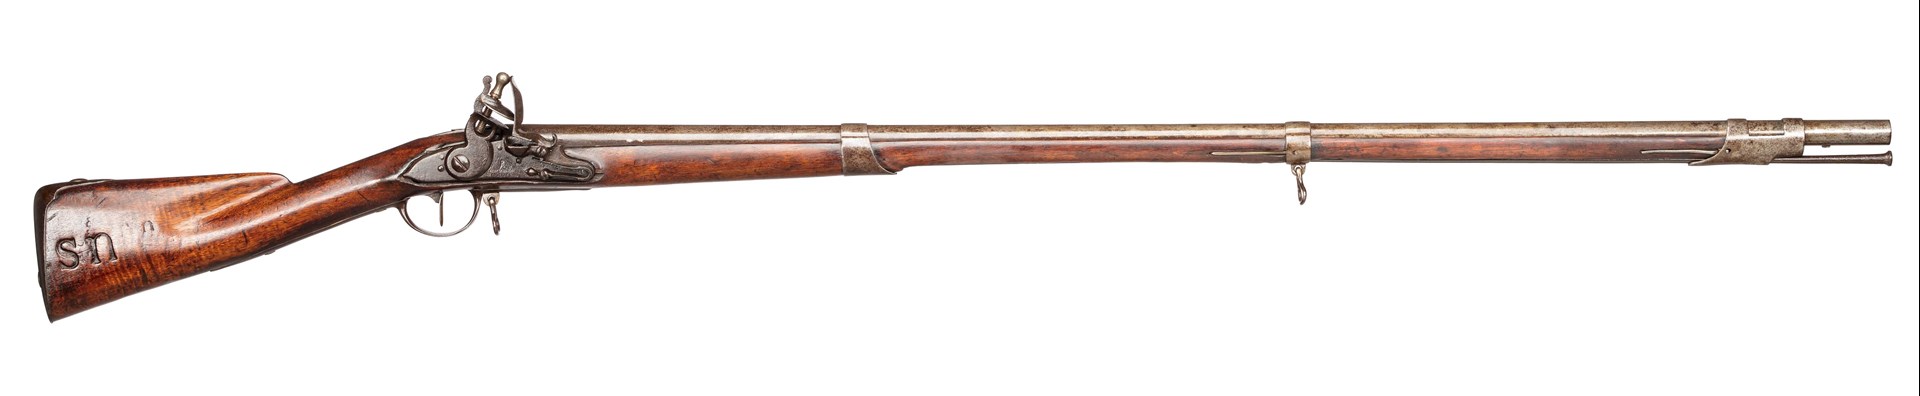 A U.S.-marked Charleville musket shown on white